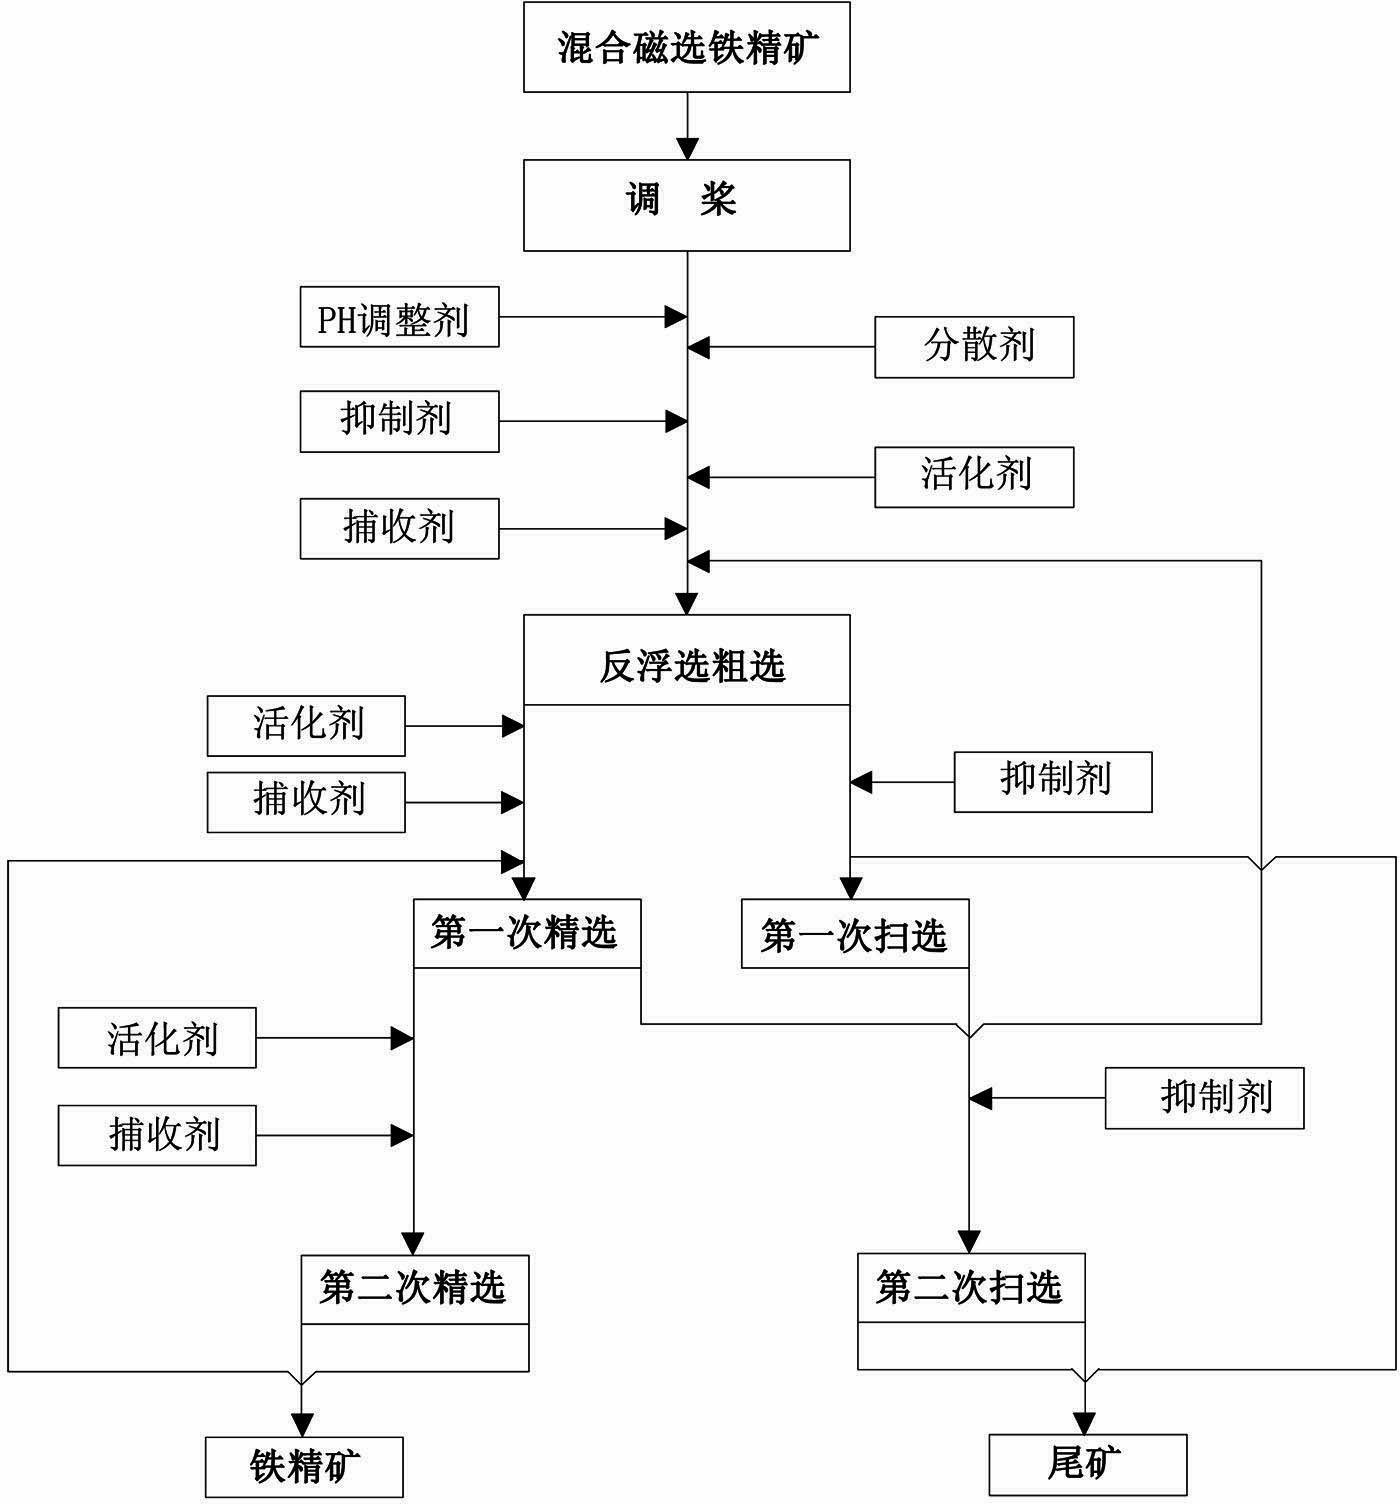 Dispersed flotation separation method for carbonate-containing iron ore